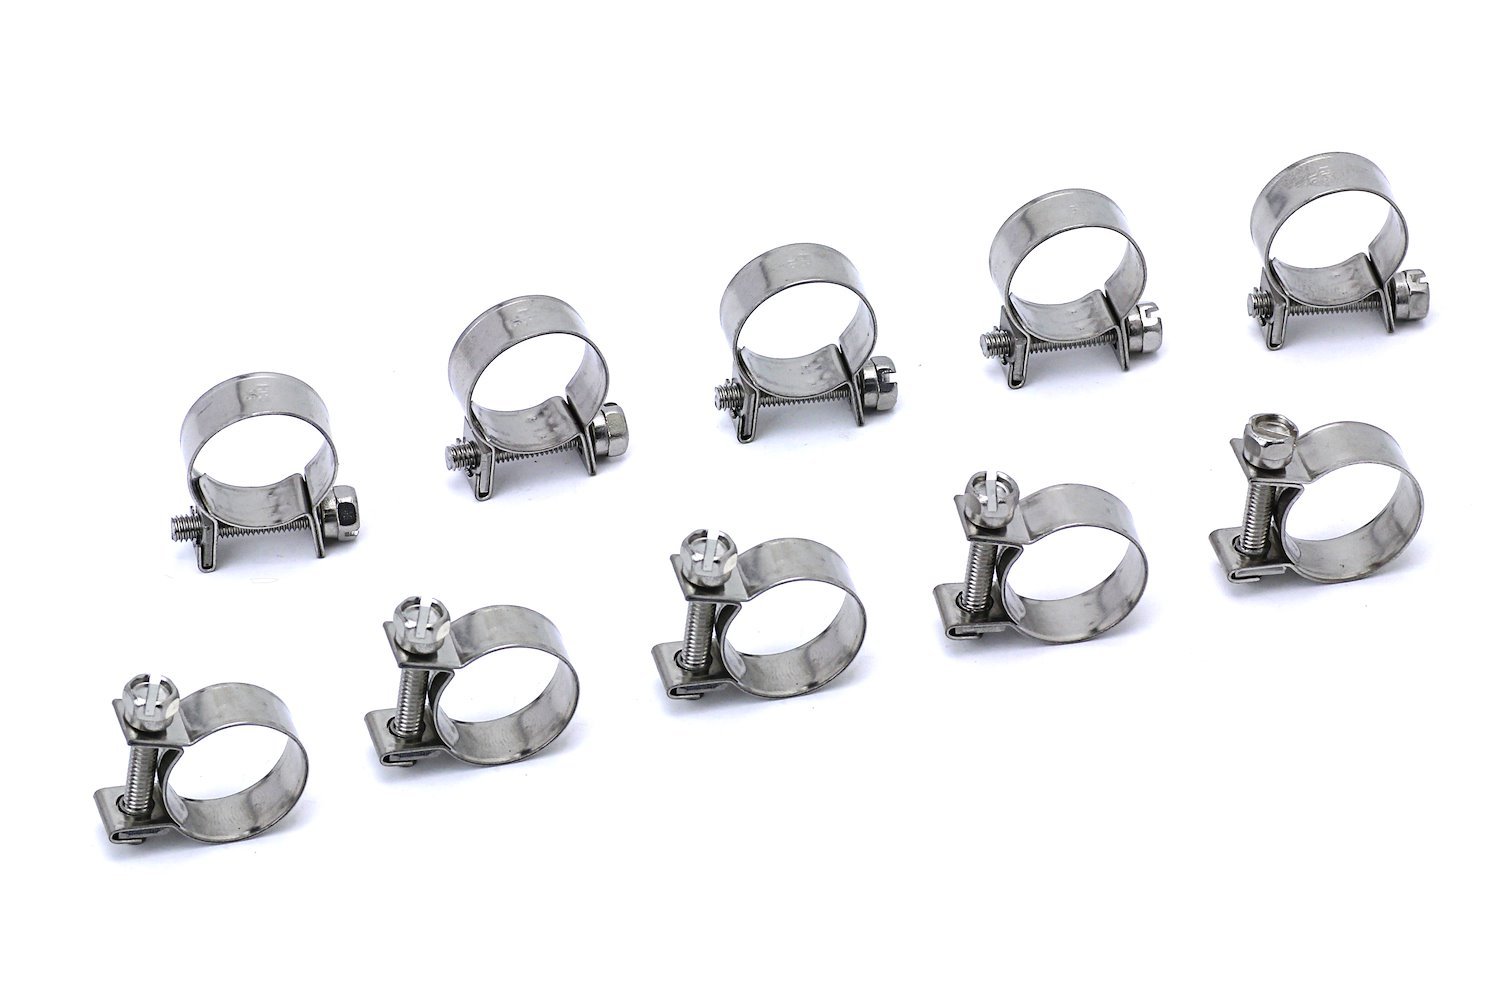 FIC-12x10 Fuel Injection Hose Clamp, 10 Stainless Steel Small Hose Clamps, SAE Size 14, 15/32 in. - 35/64 in. (12 mm-14 mm)